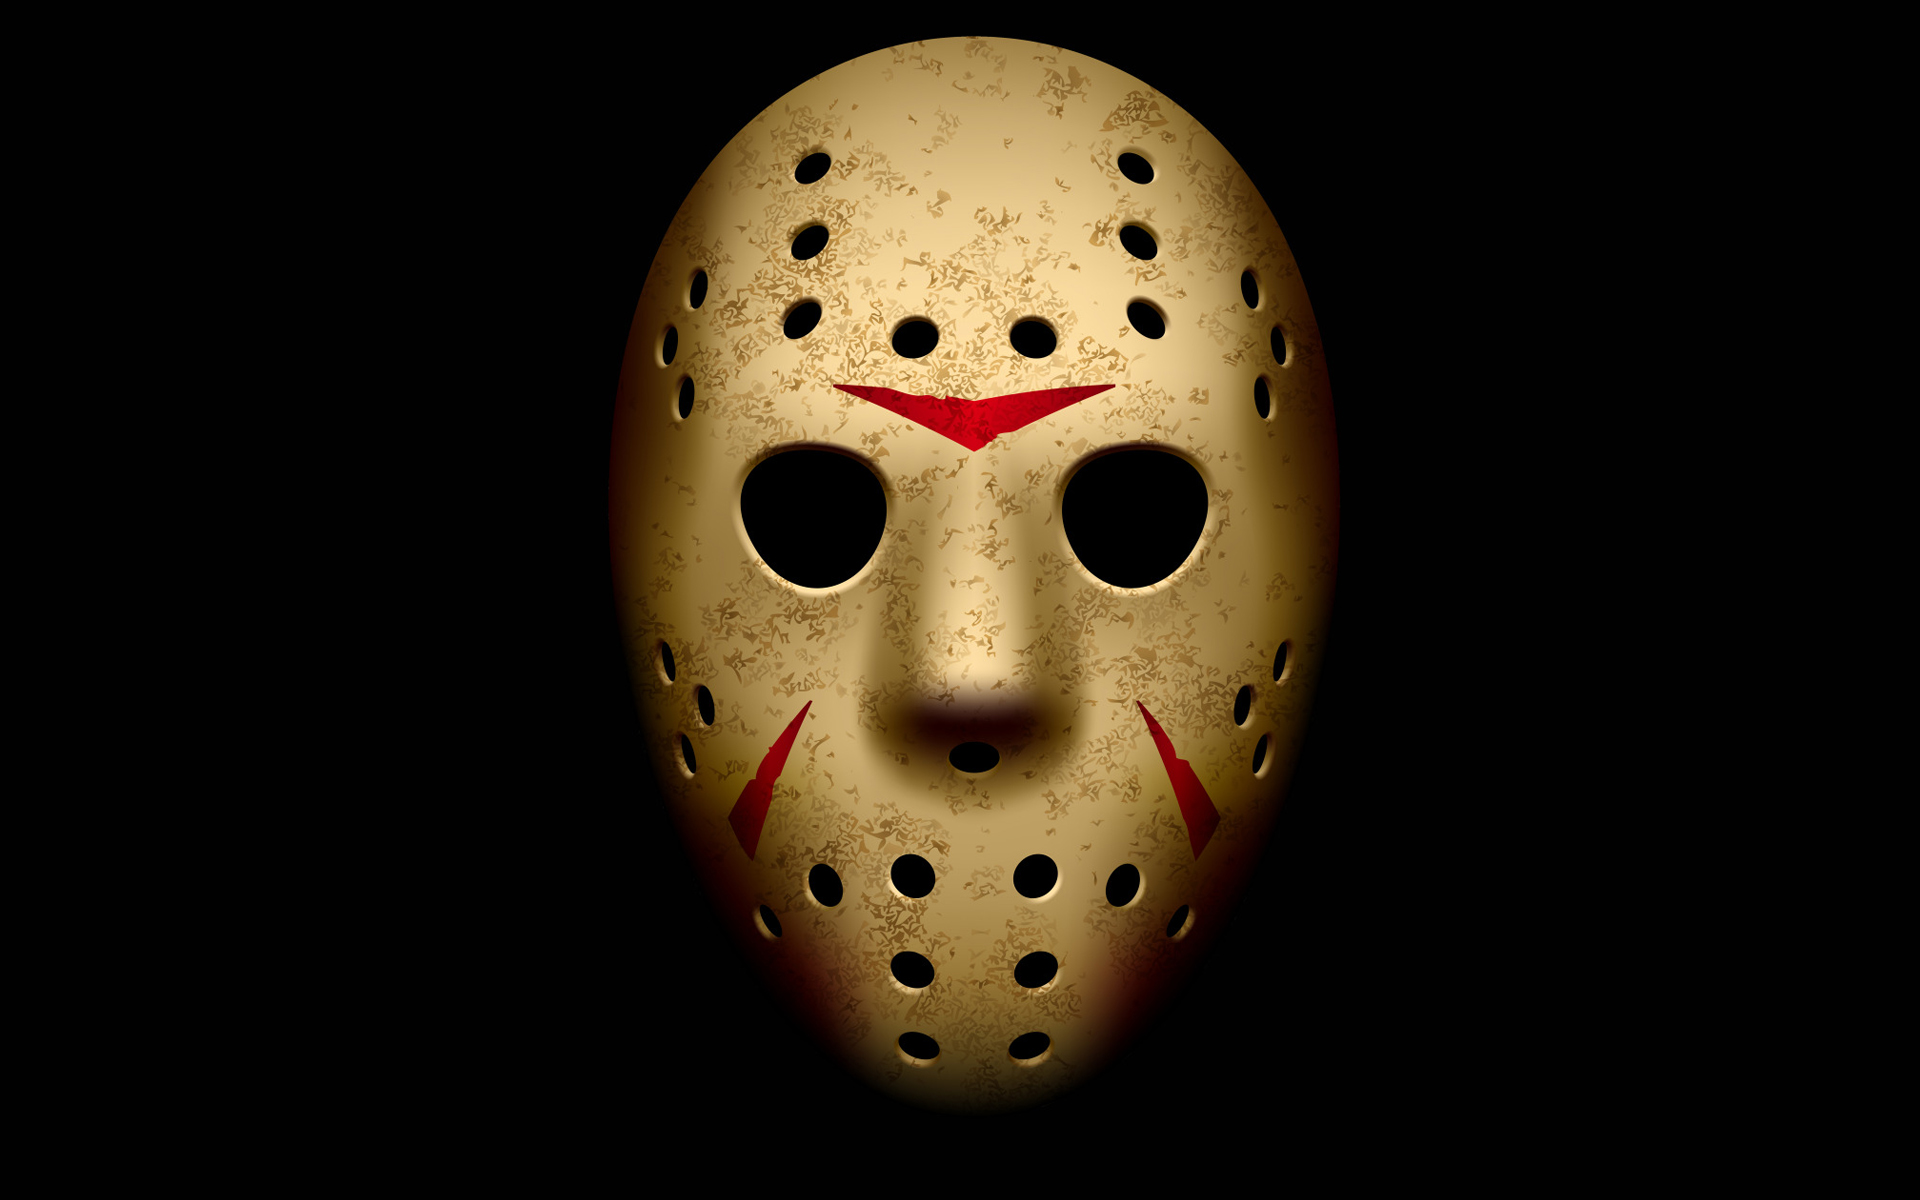 Wallpaper jason voorhees hockey mask black background friday the th x